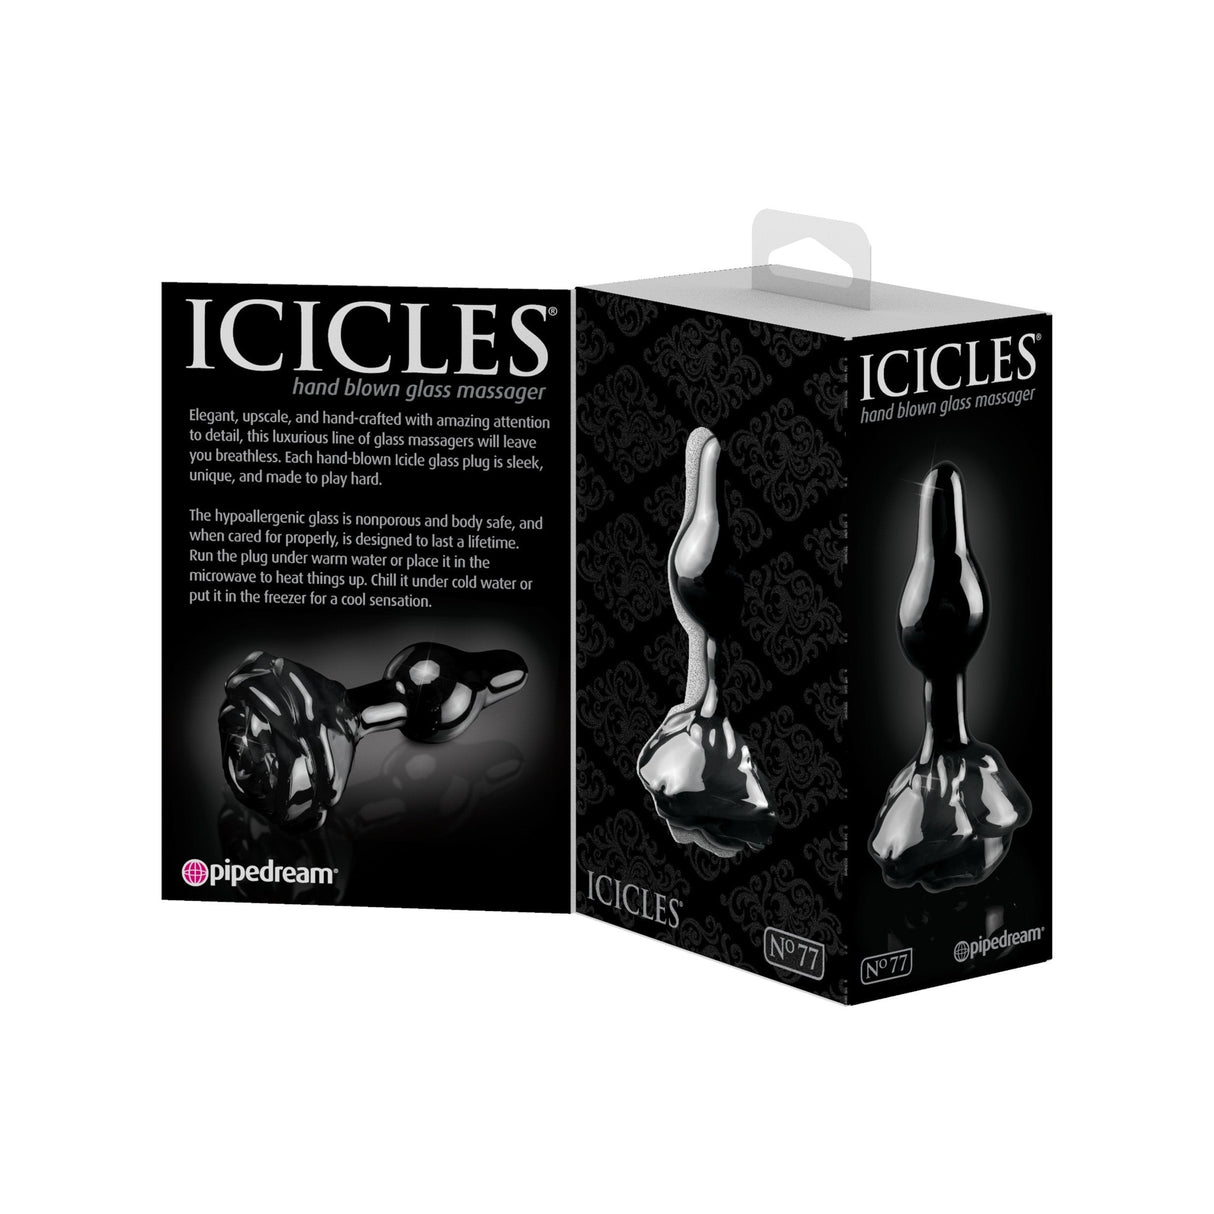 Pipedream - Icicles No 77 Hand Blown Massager (Black) PD1659 CherryAffairs